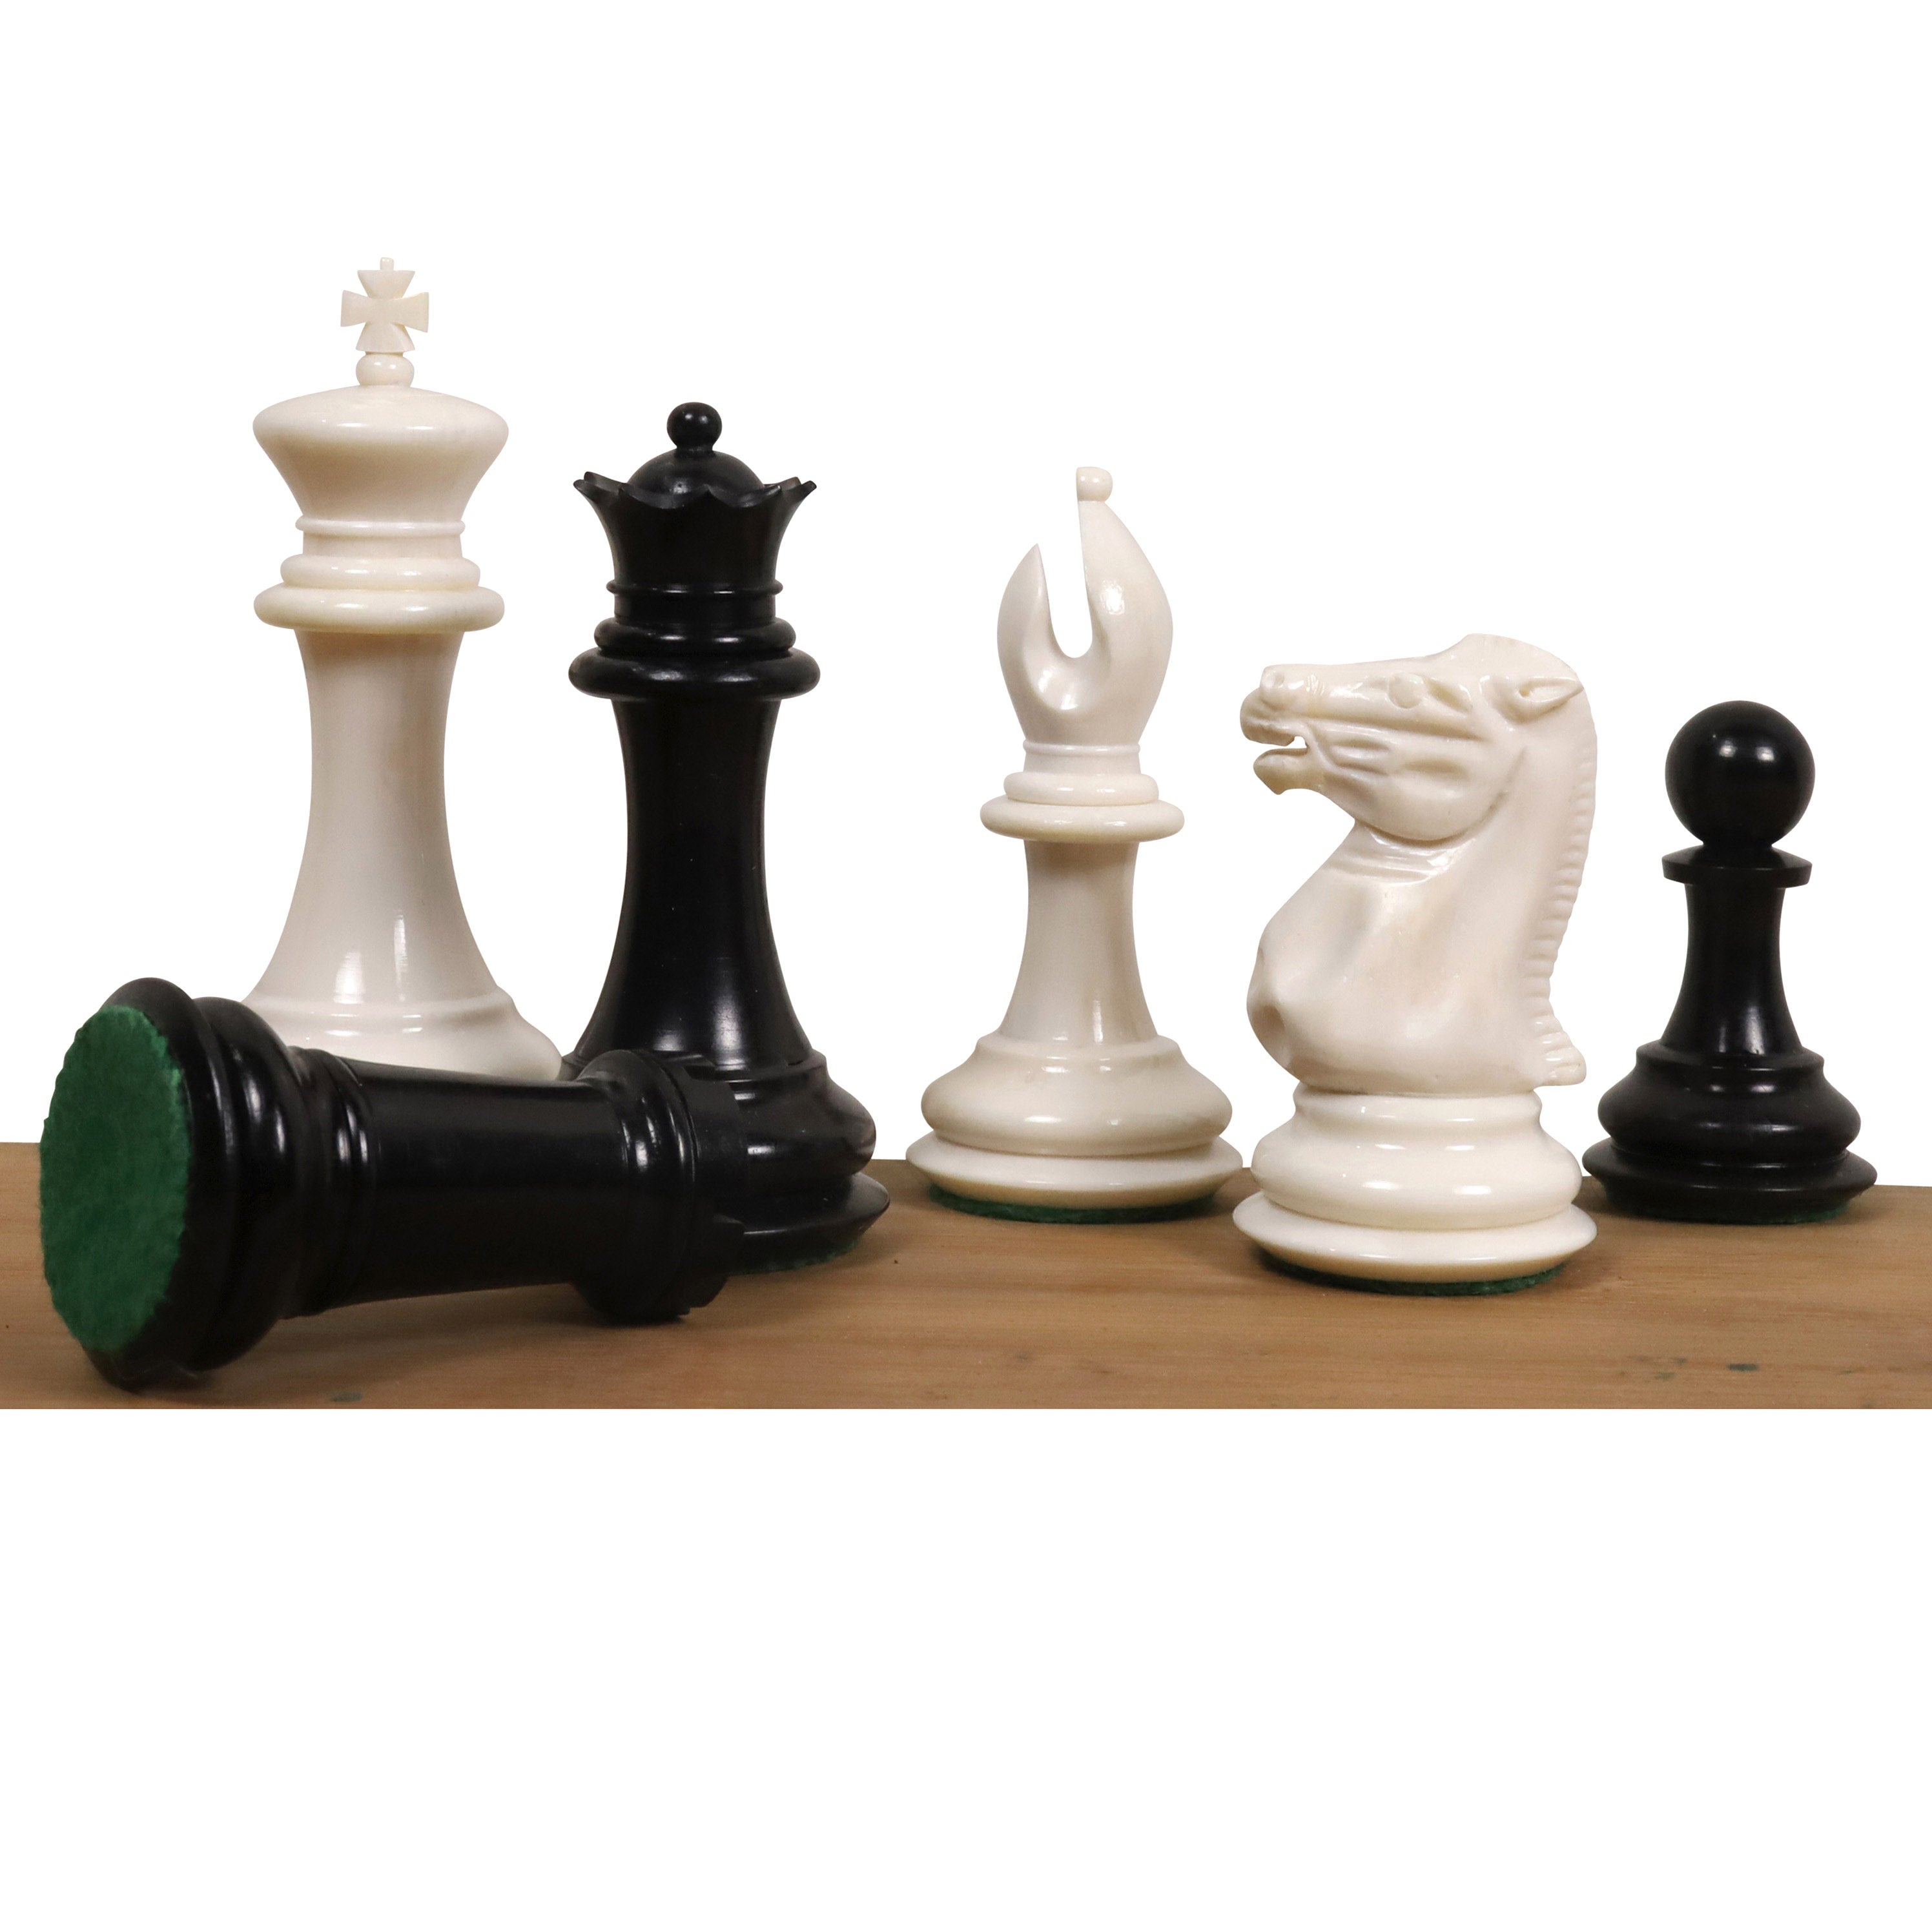 1849 Jacques Cook Camel Bone Chess Pieces Only Set - Black & White